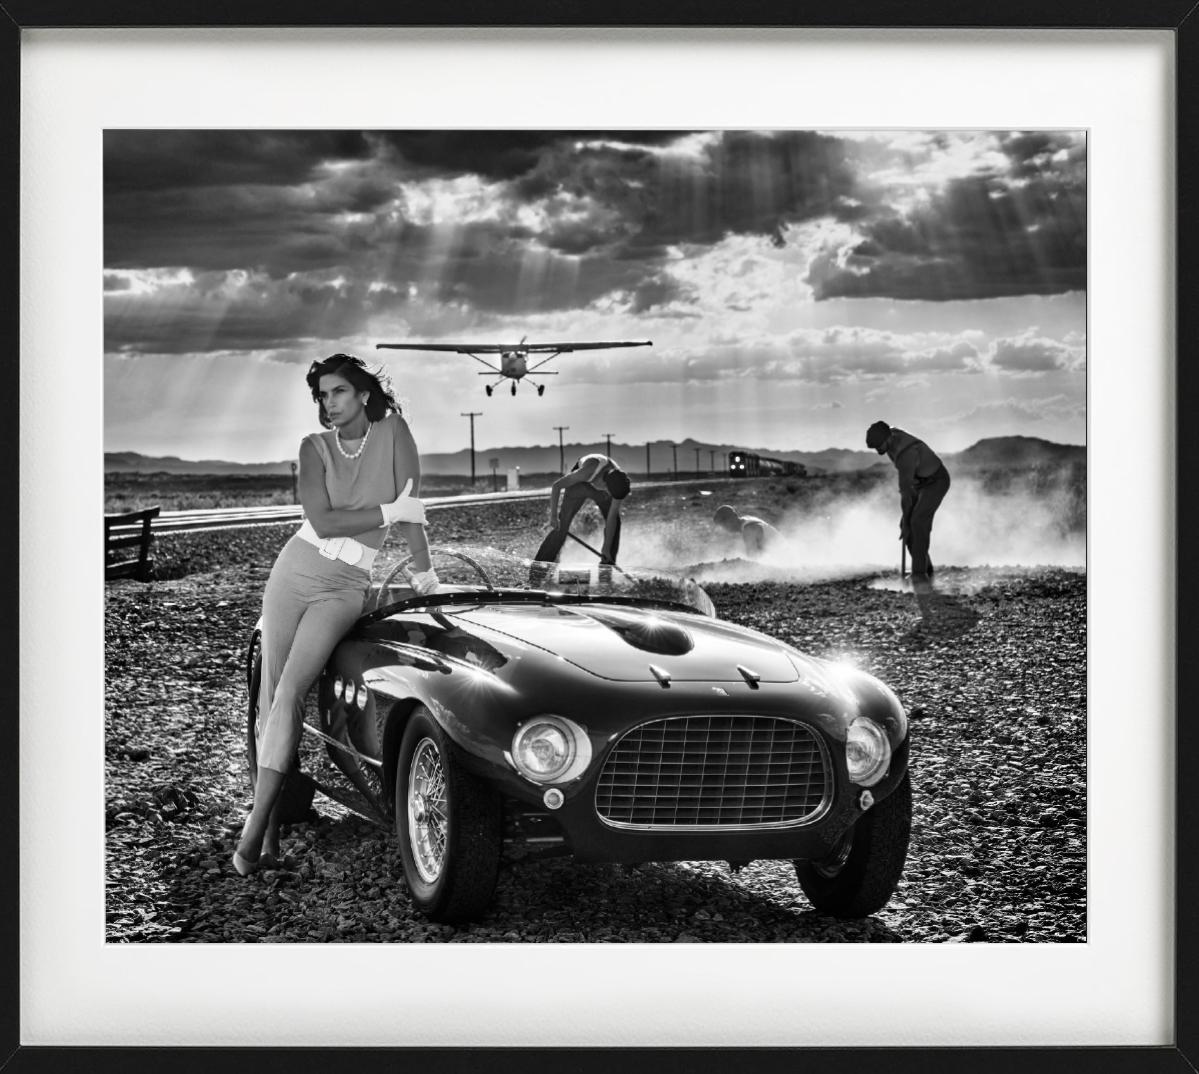 Planes, Trains and Automobiles - Supermodel Cindy Crawford with vintage Ferrari - Contemporary Photograph by David Yarrow